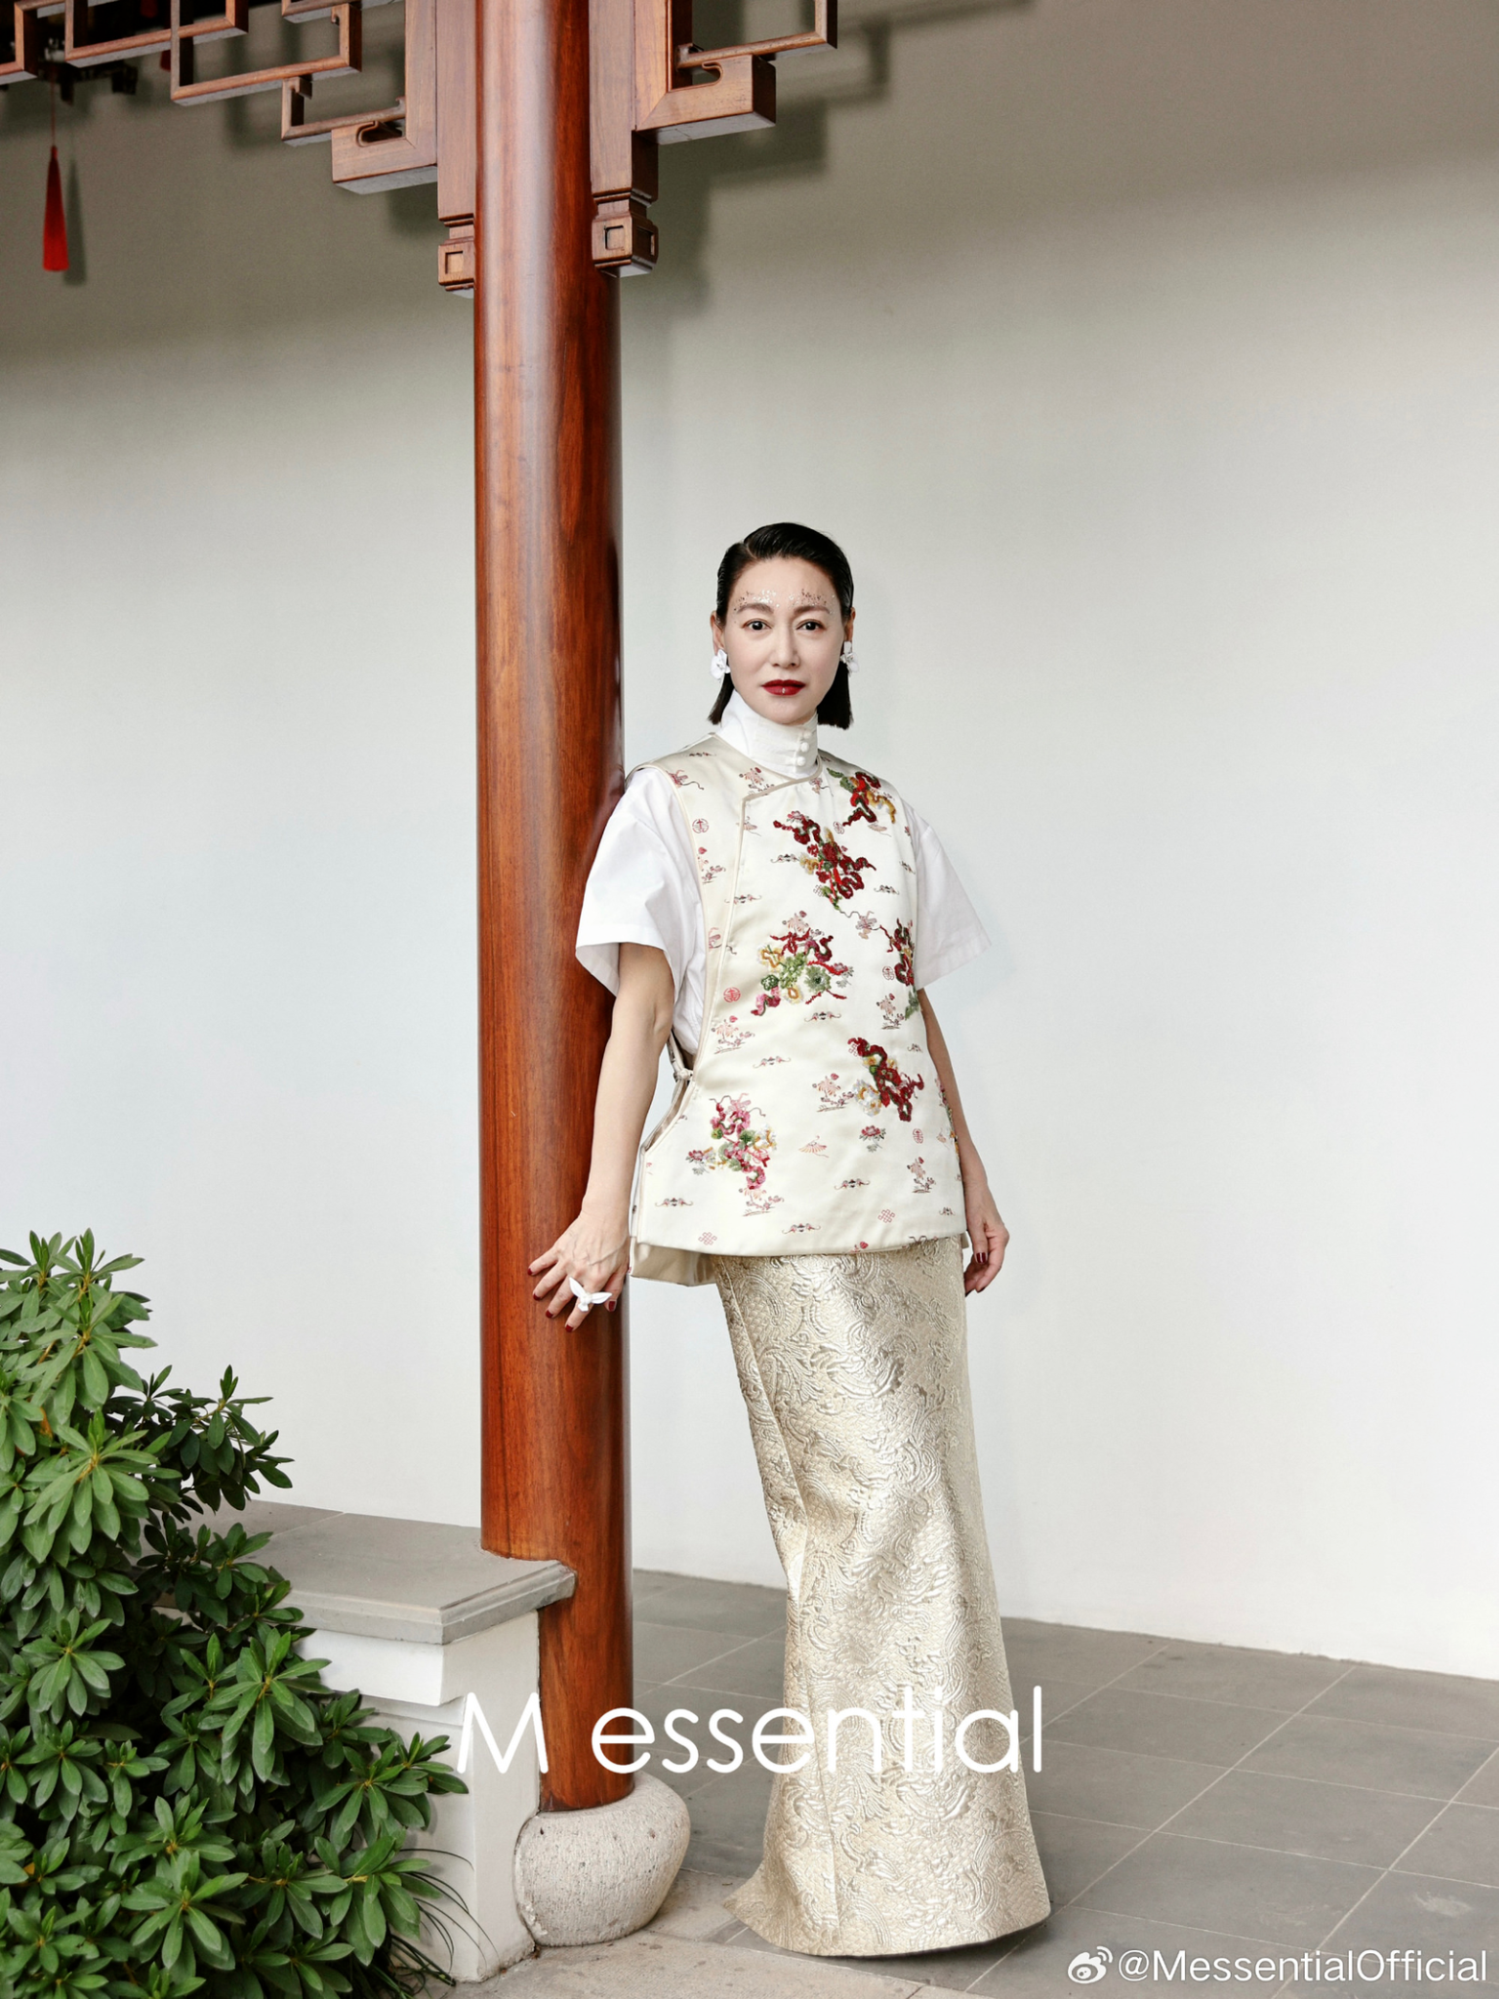 Like its “old money” counterpart in the West, Chinese “old money style” symbolizes an appreciation of historical pedigree and refined taste. Photo: M Essential/Weibo